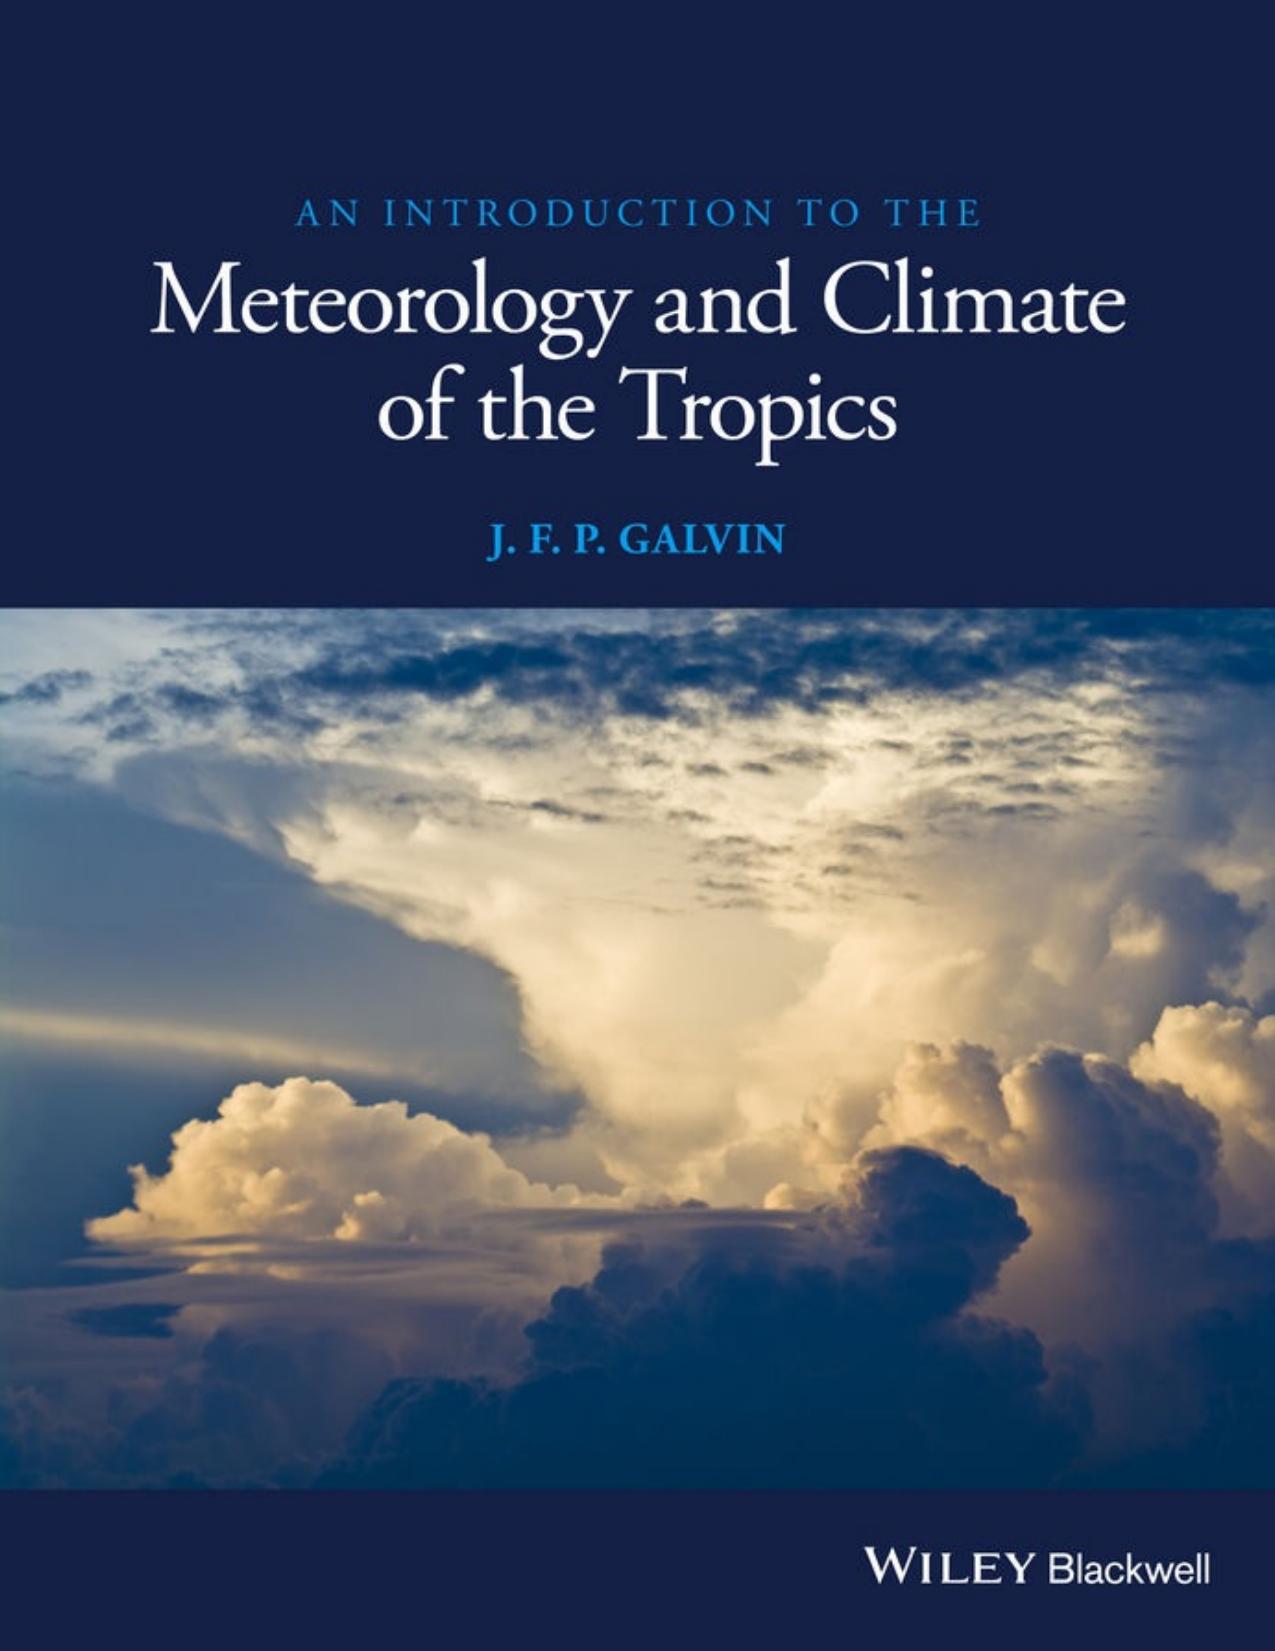 An Introduction to the Meteorology and Climate of the Tropics - PDFDrive.com